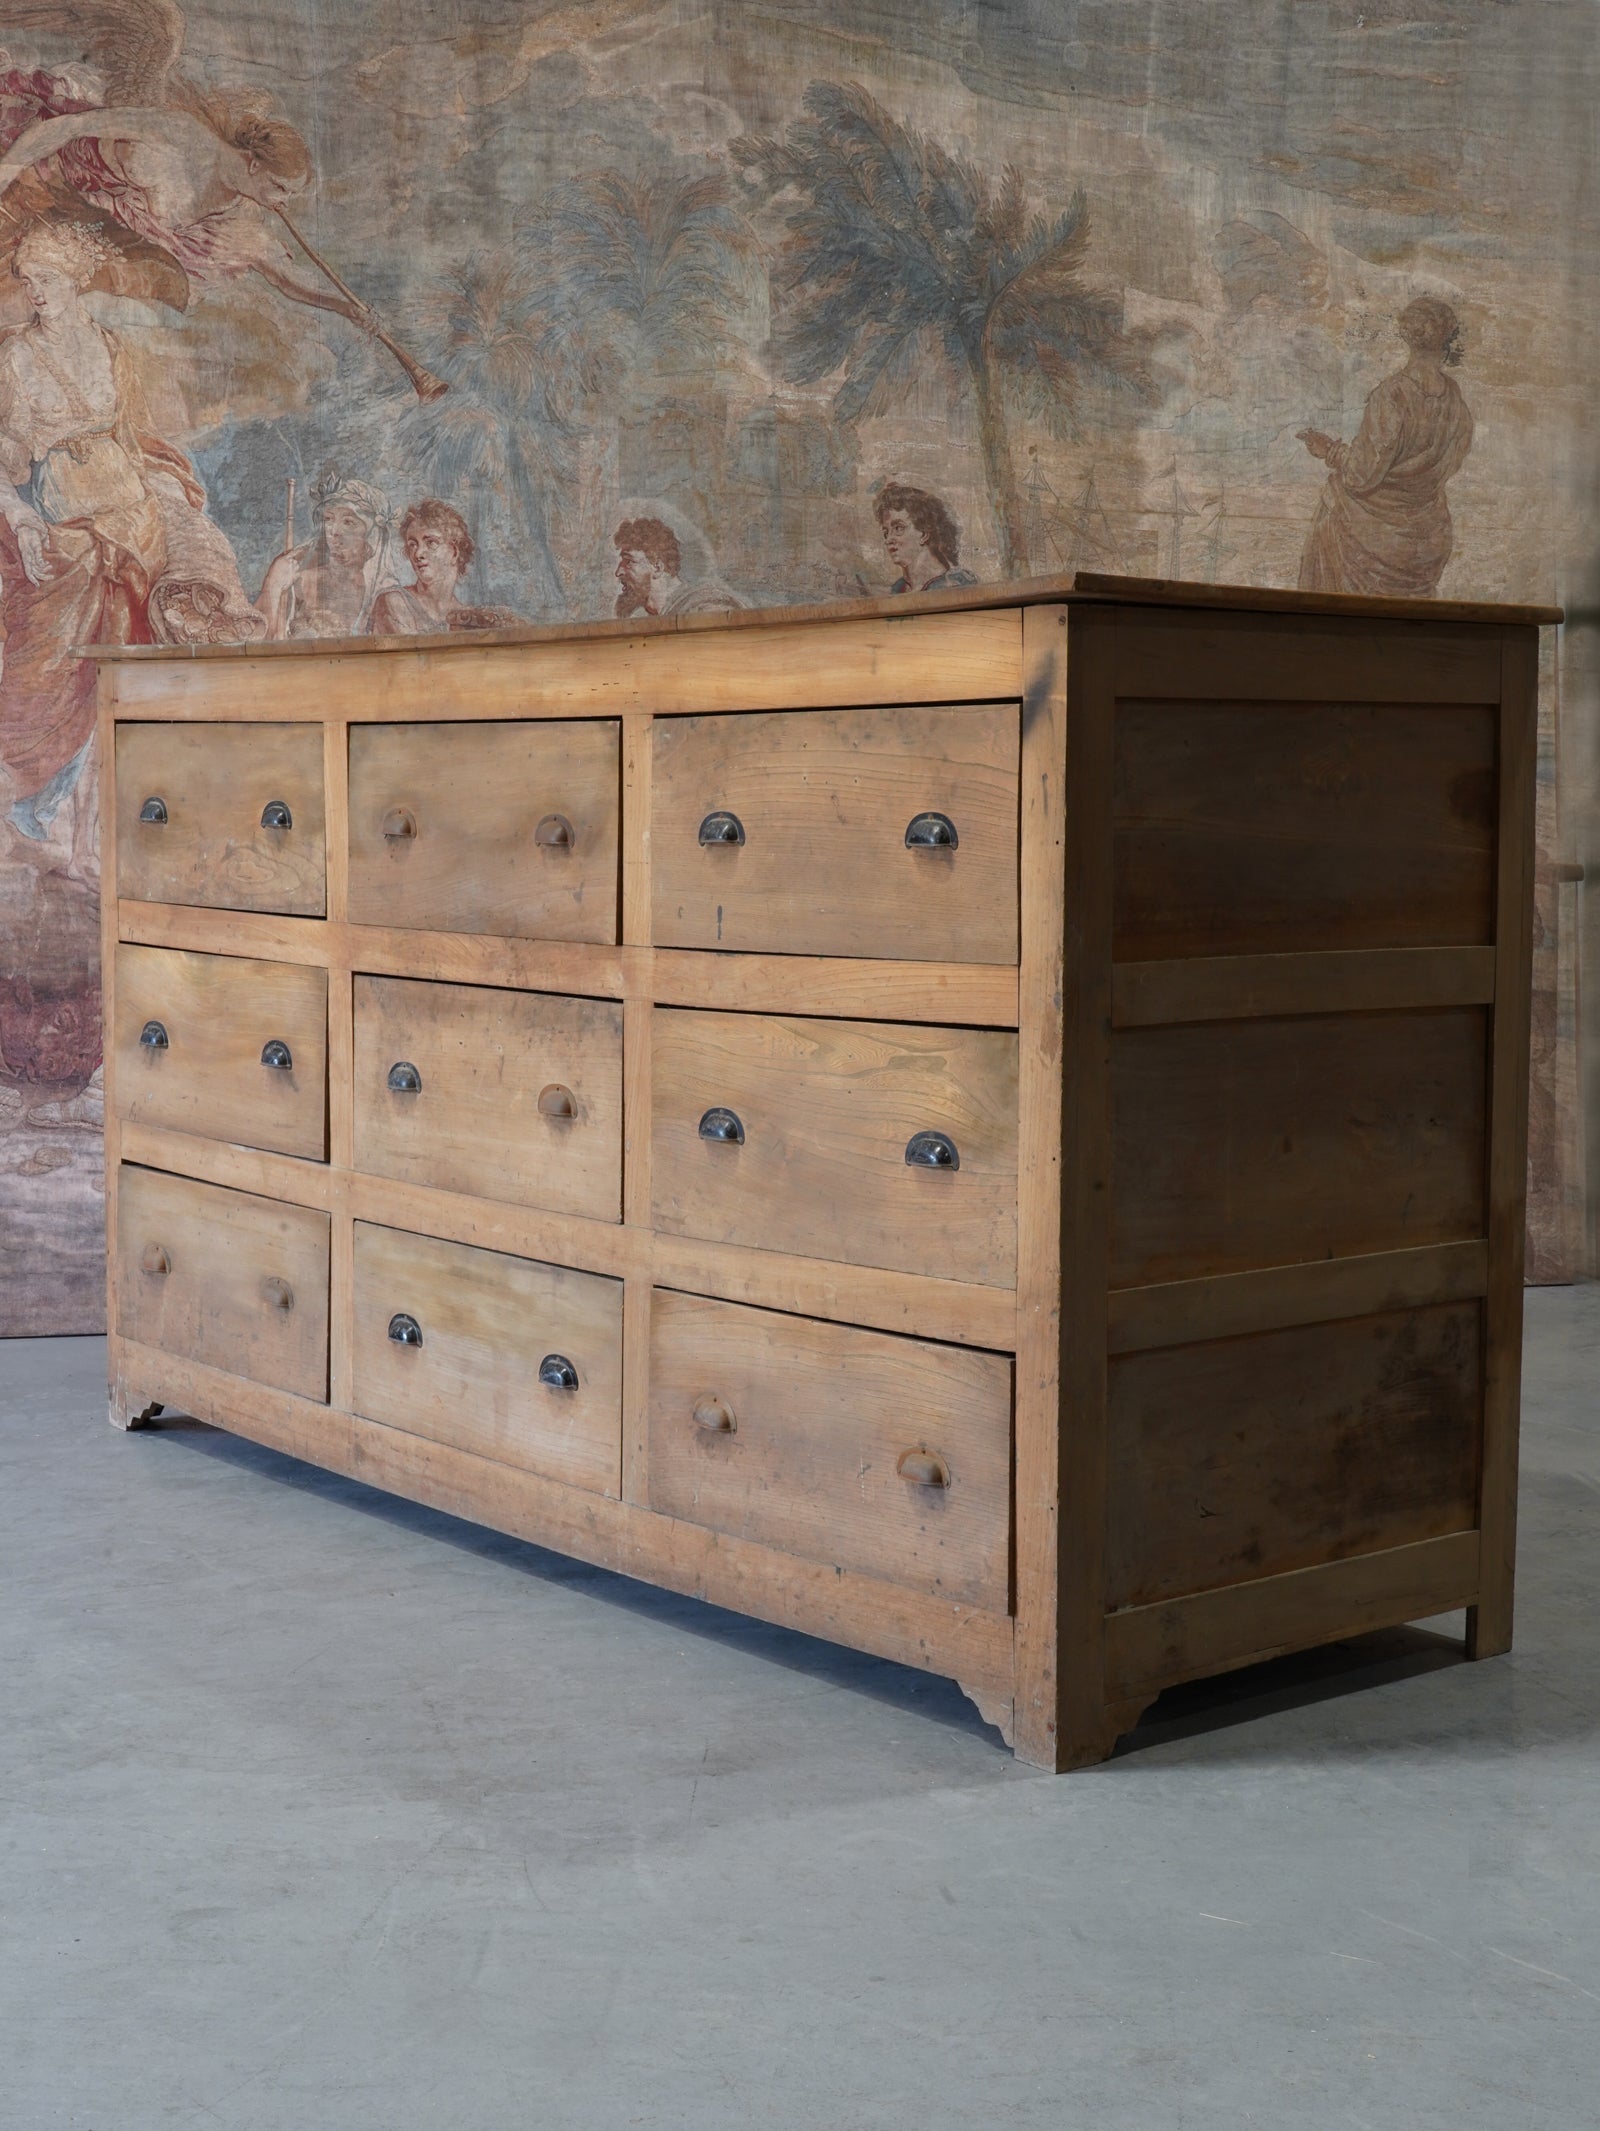 A Large Bank of Monastery Drawers